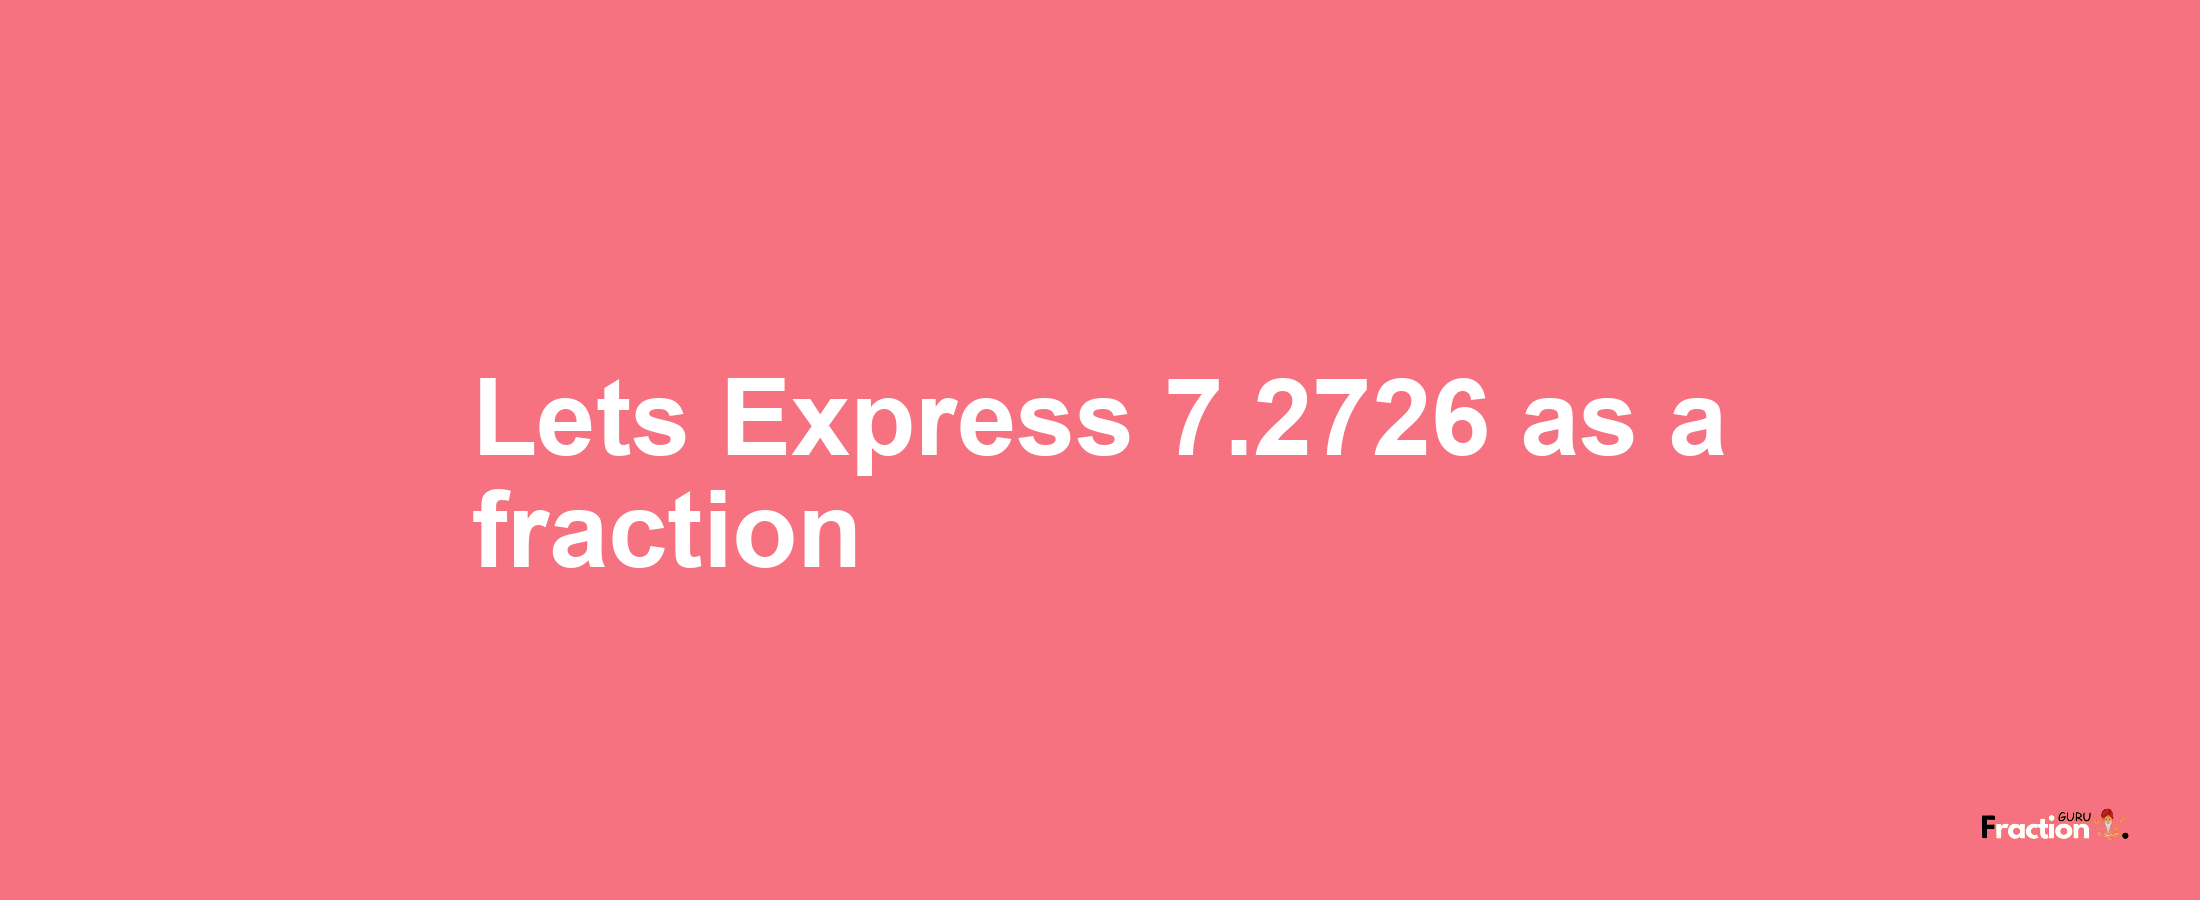 Lets Express 7.2726 as afraction